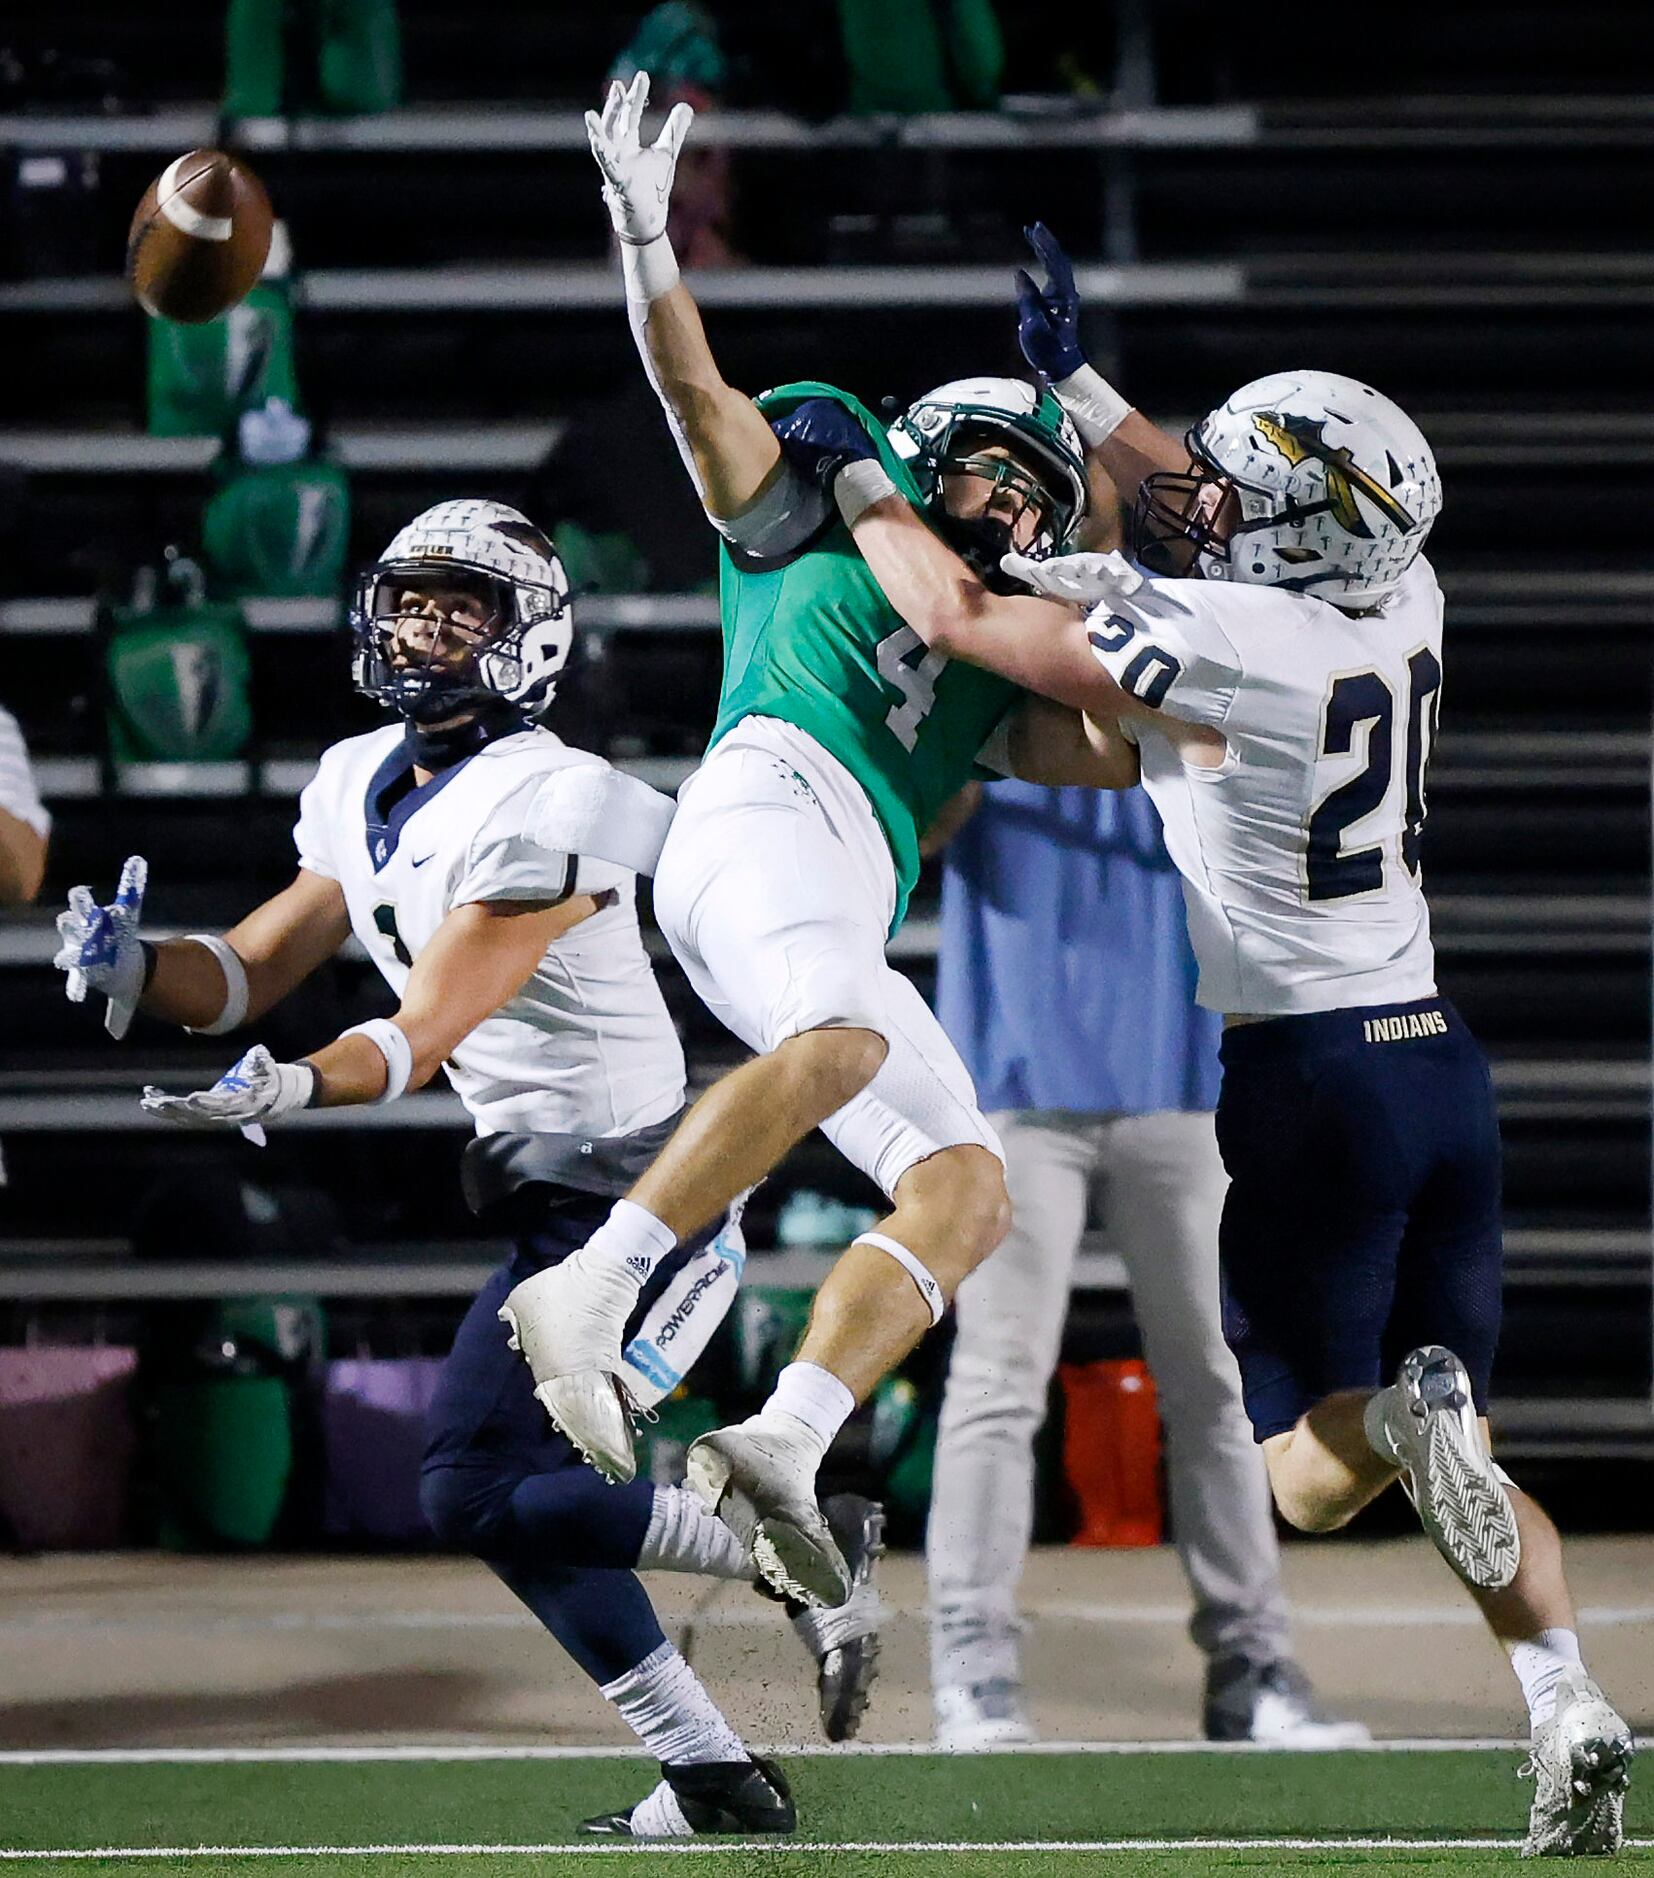 Keller defender Jay Powitz (20) is called for pass interference near the goal line as...